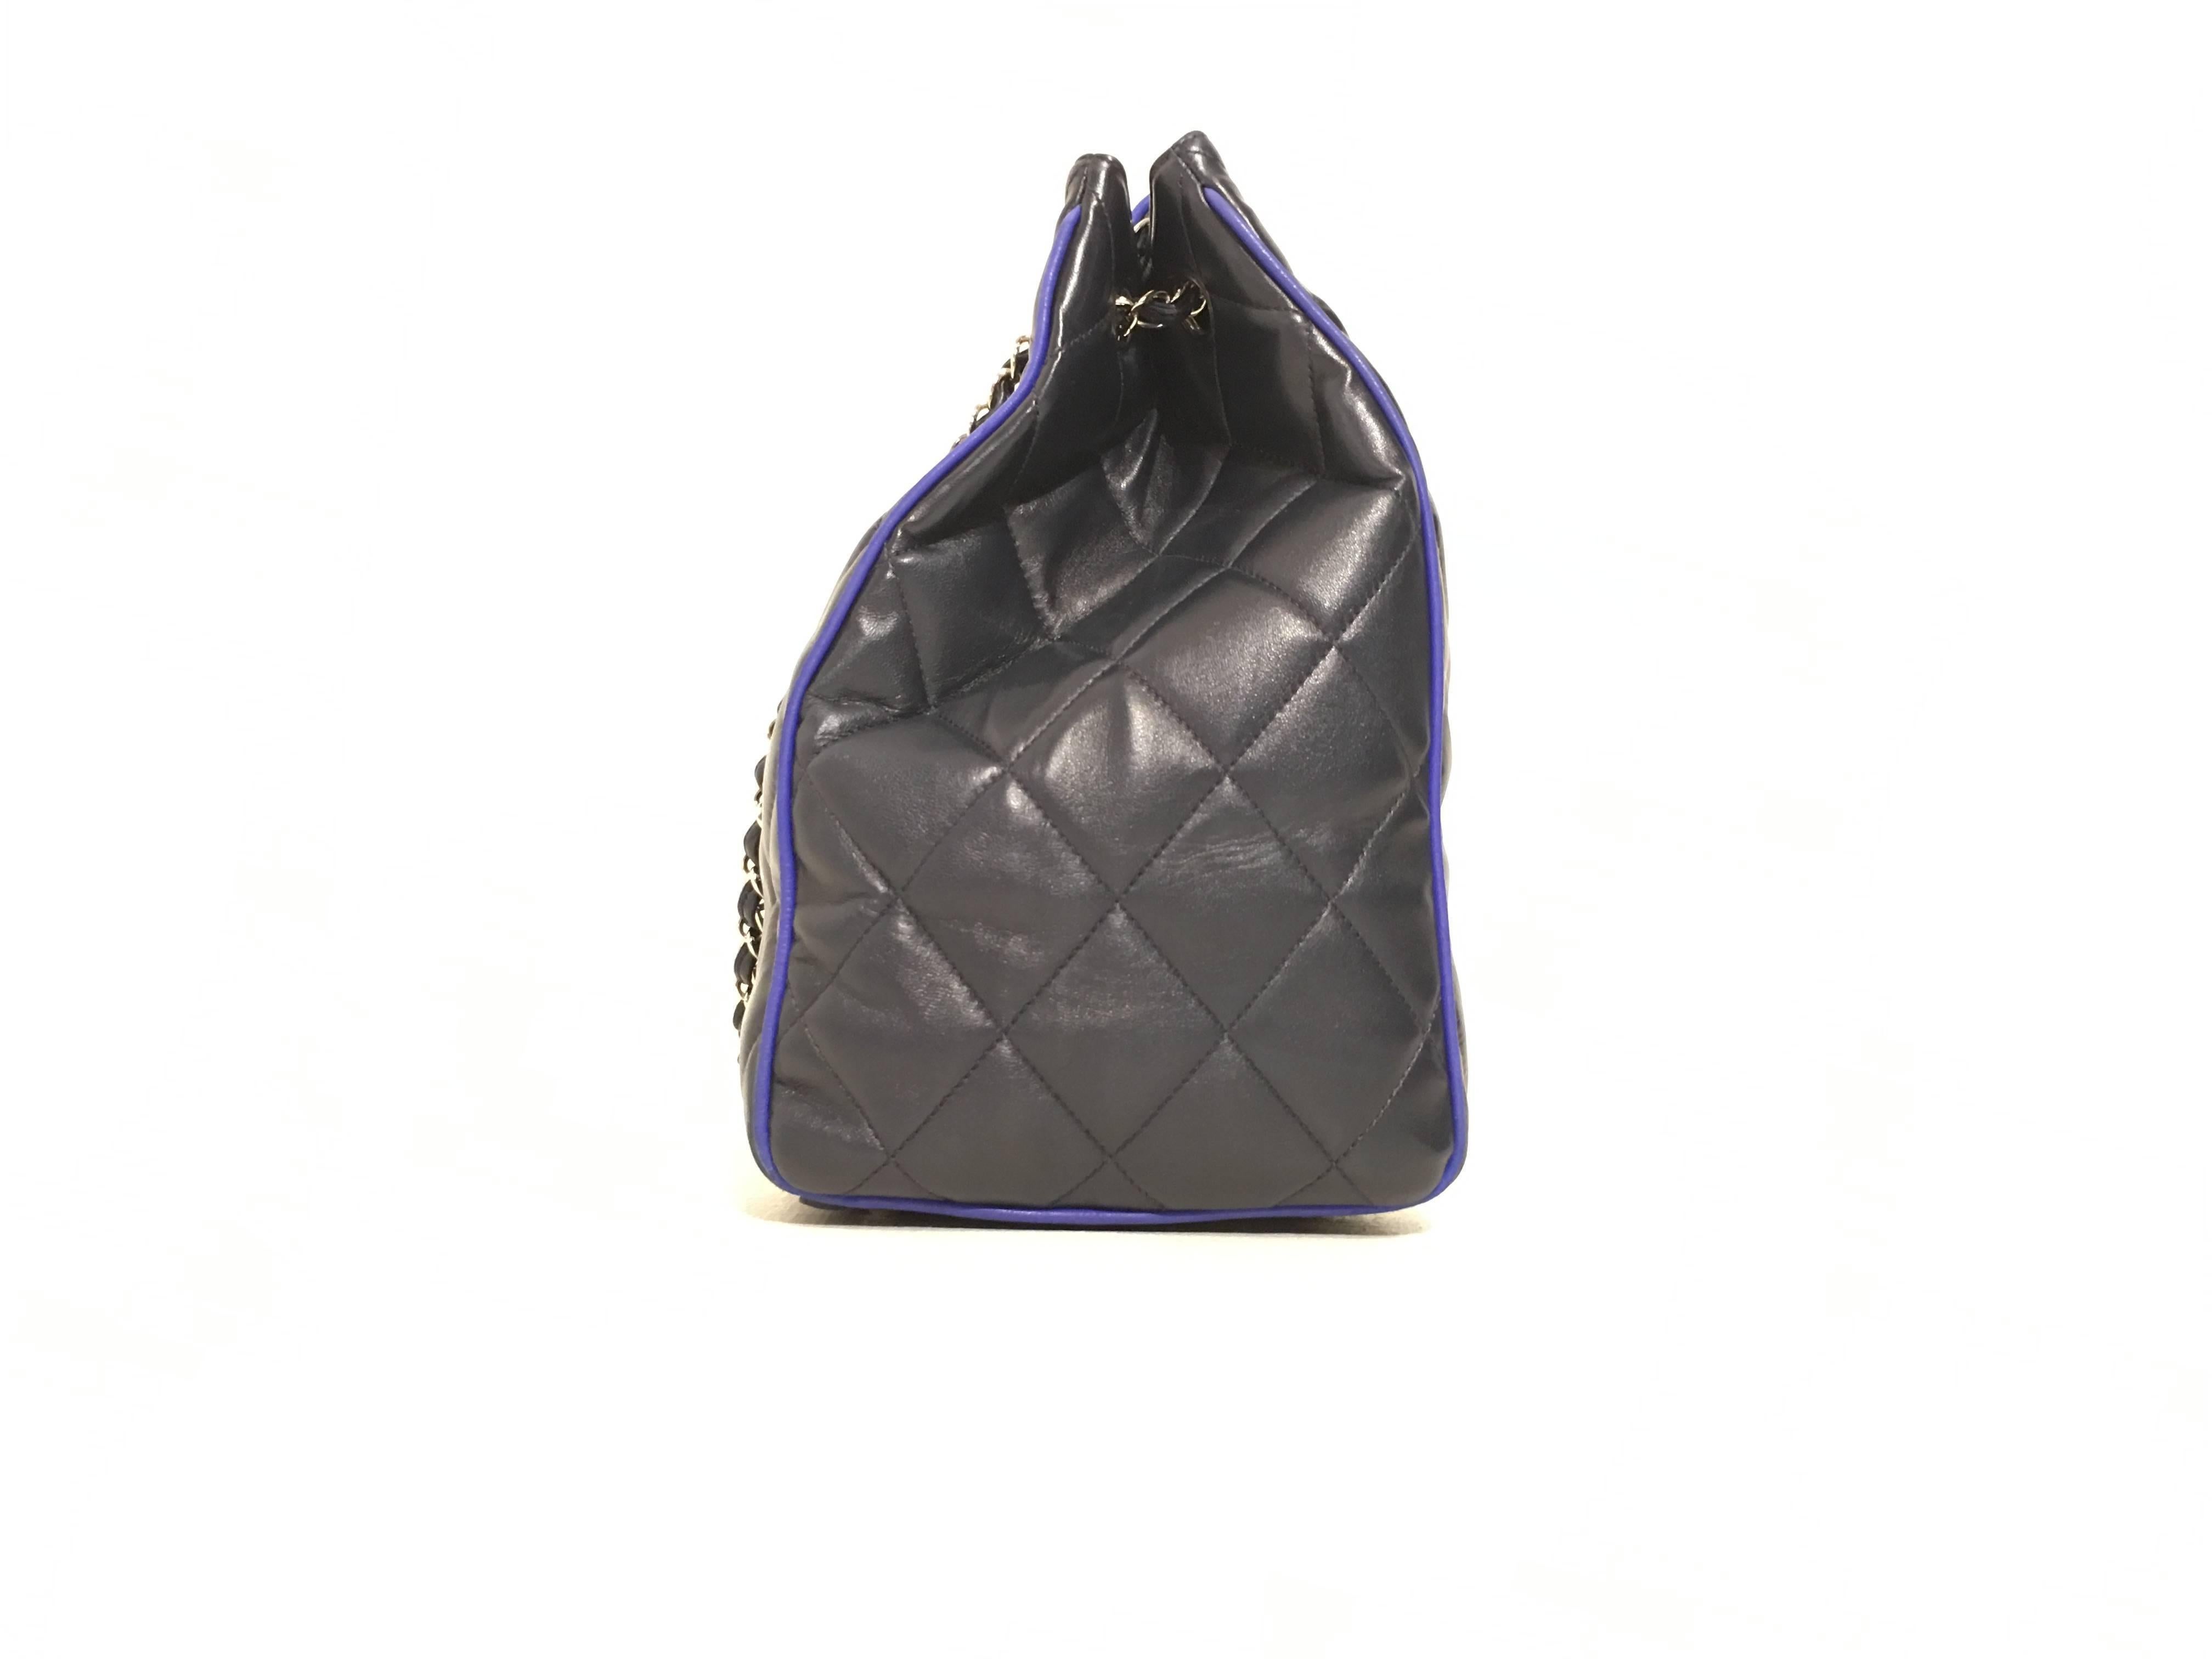 Black Chanel Navy Quilted Leather Bag